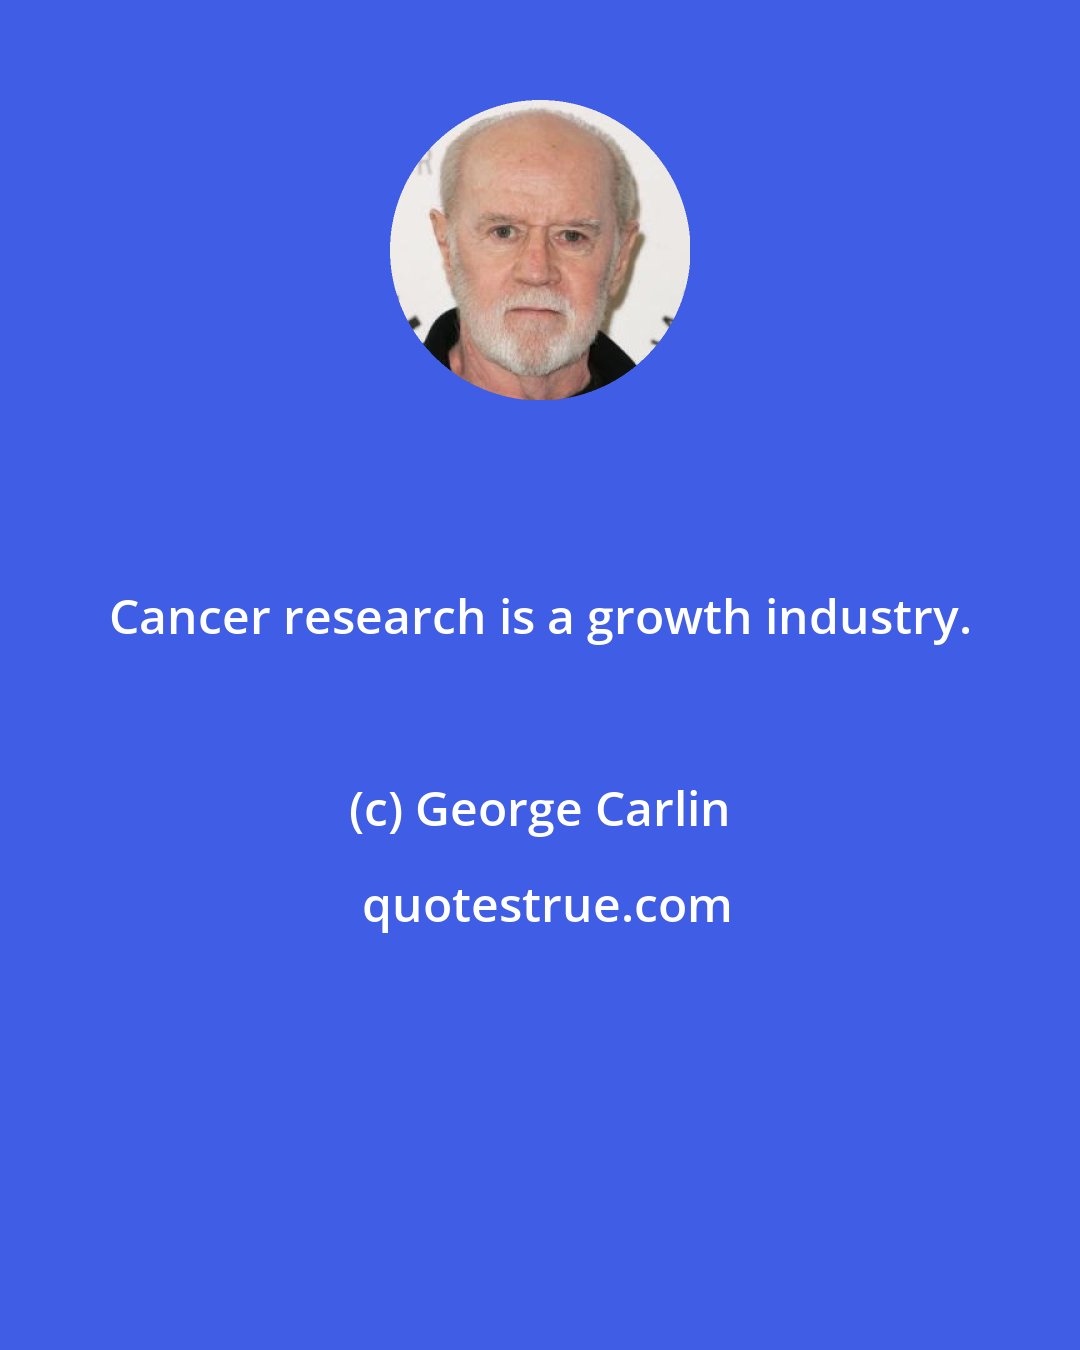 George Carlin: Cancer research is a growth industry.